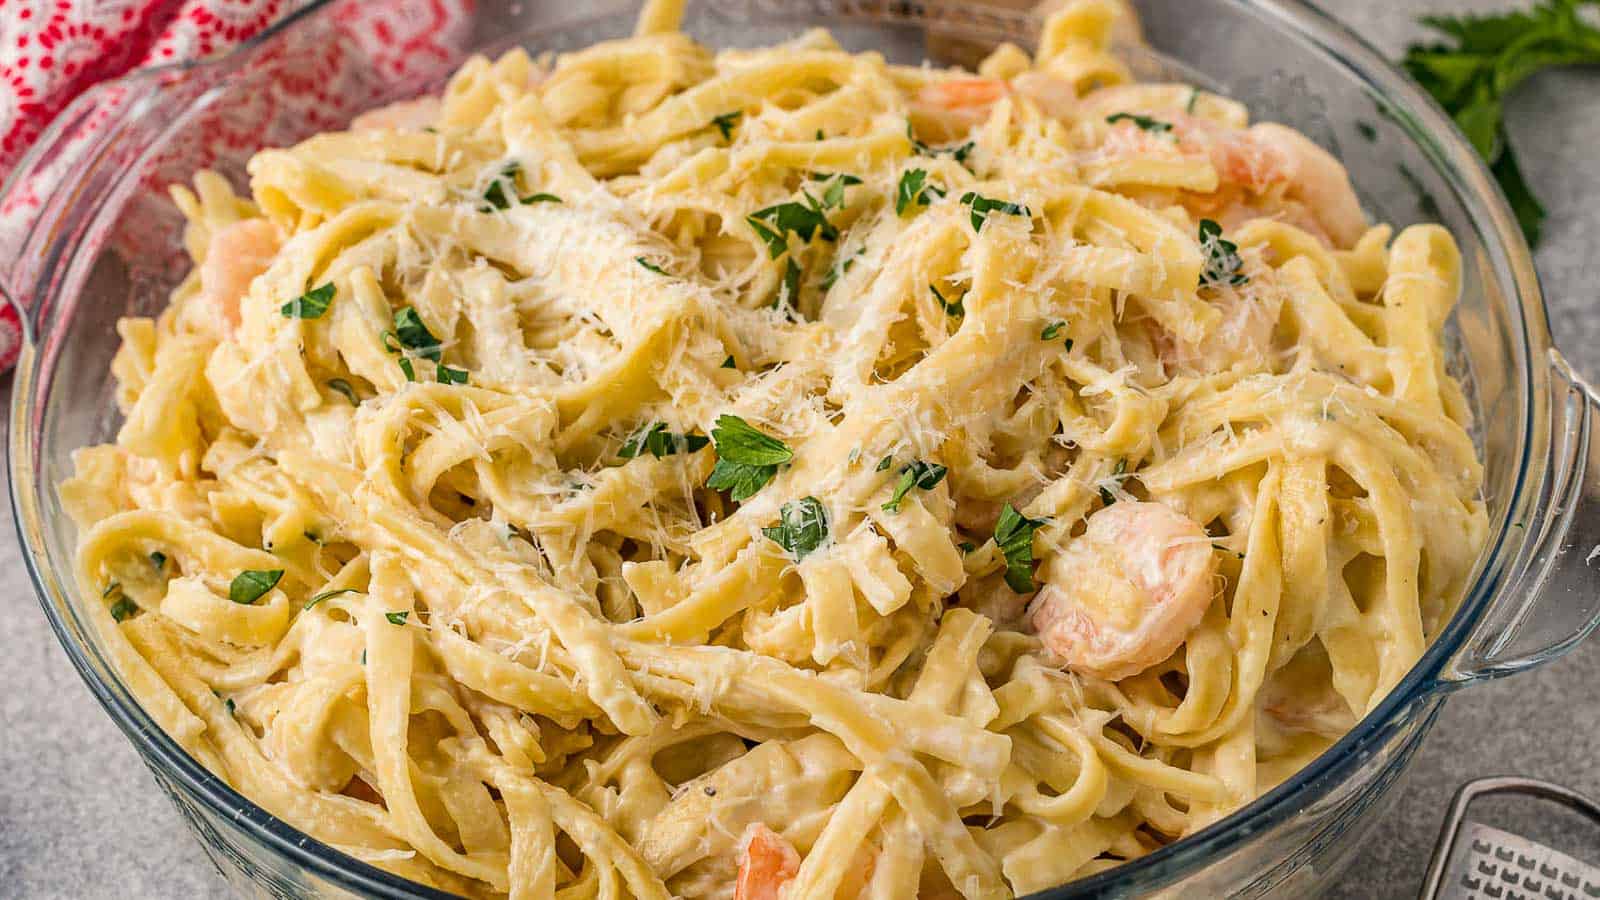 Shrimp and fettuccine pasta in a large glass bowl.